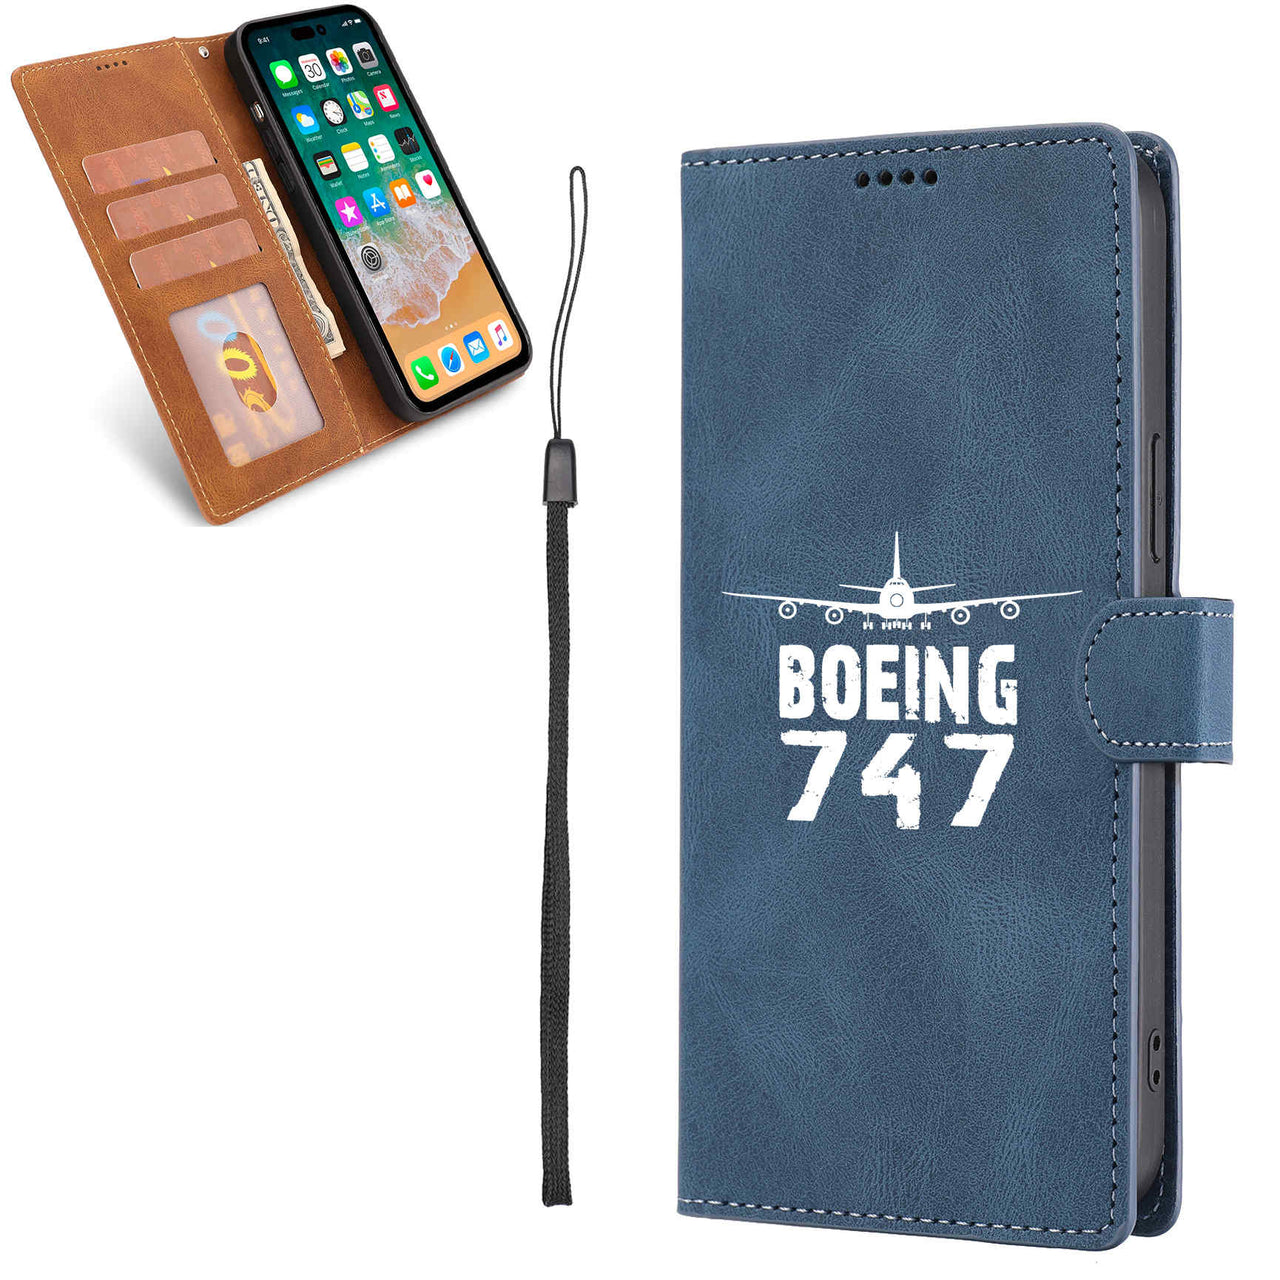 Boeing 747 & Plane Designed Leather Samsung S & Note Cases